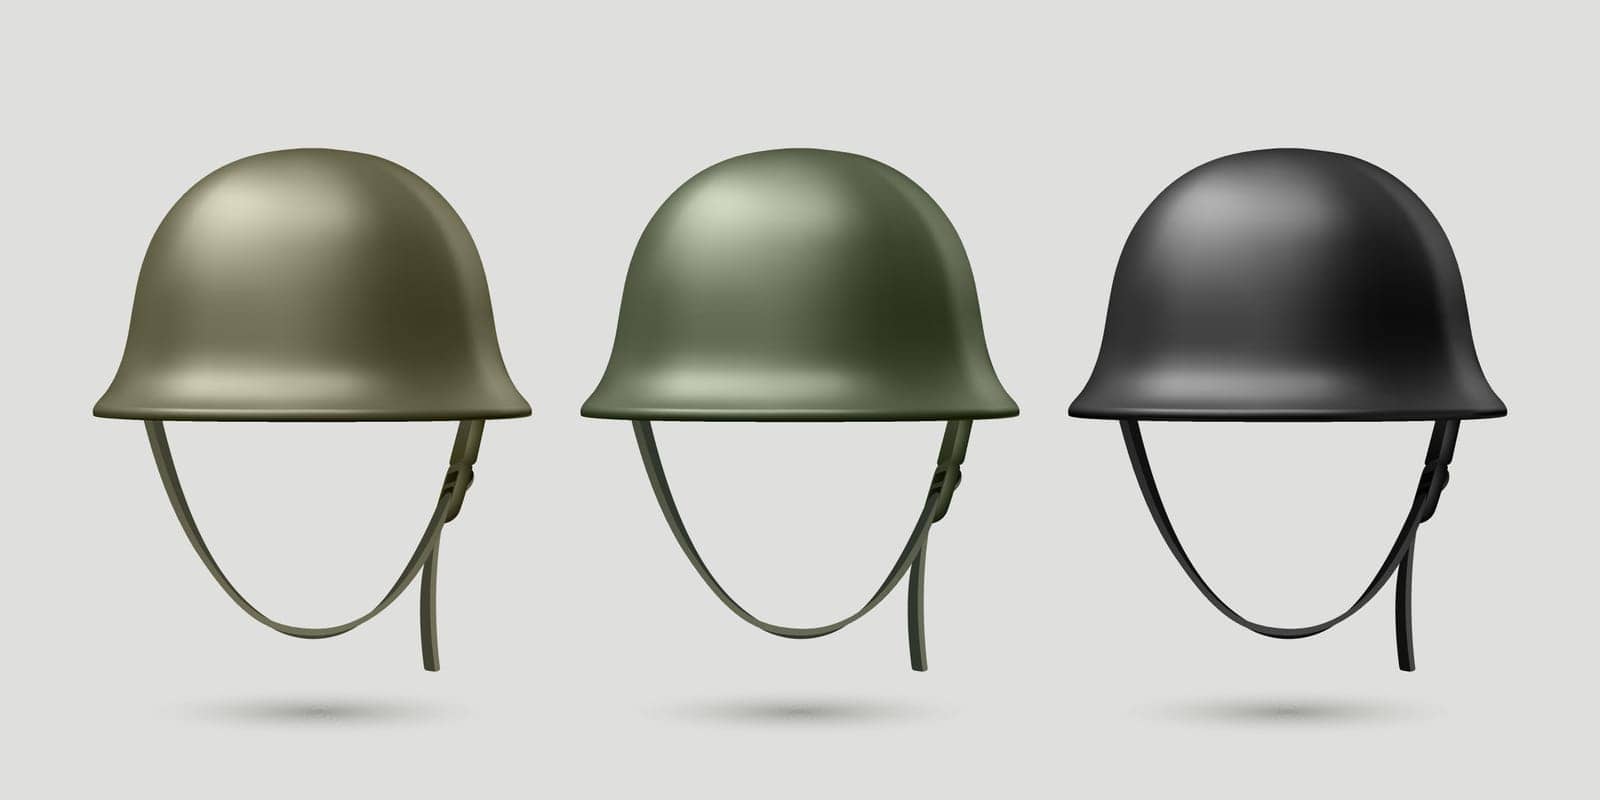 Vector 3d Realistic Military Protect Helmet Set Closeup Isolated. Helmet, Army Symbol of Defense and Protect. Soldier Helmet Design Template by Gomolach